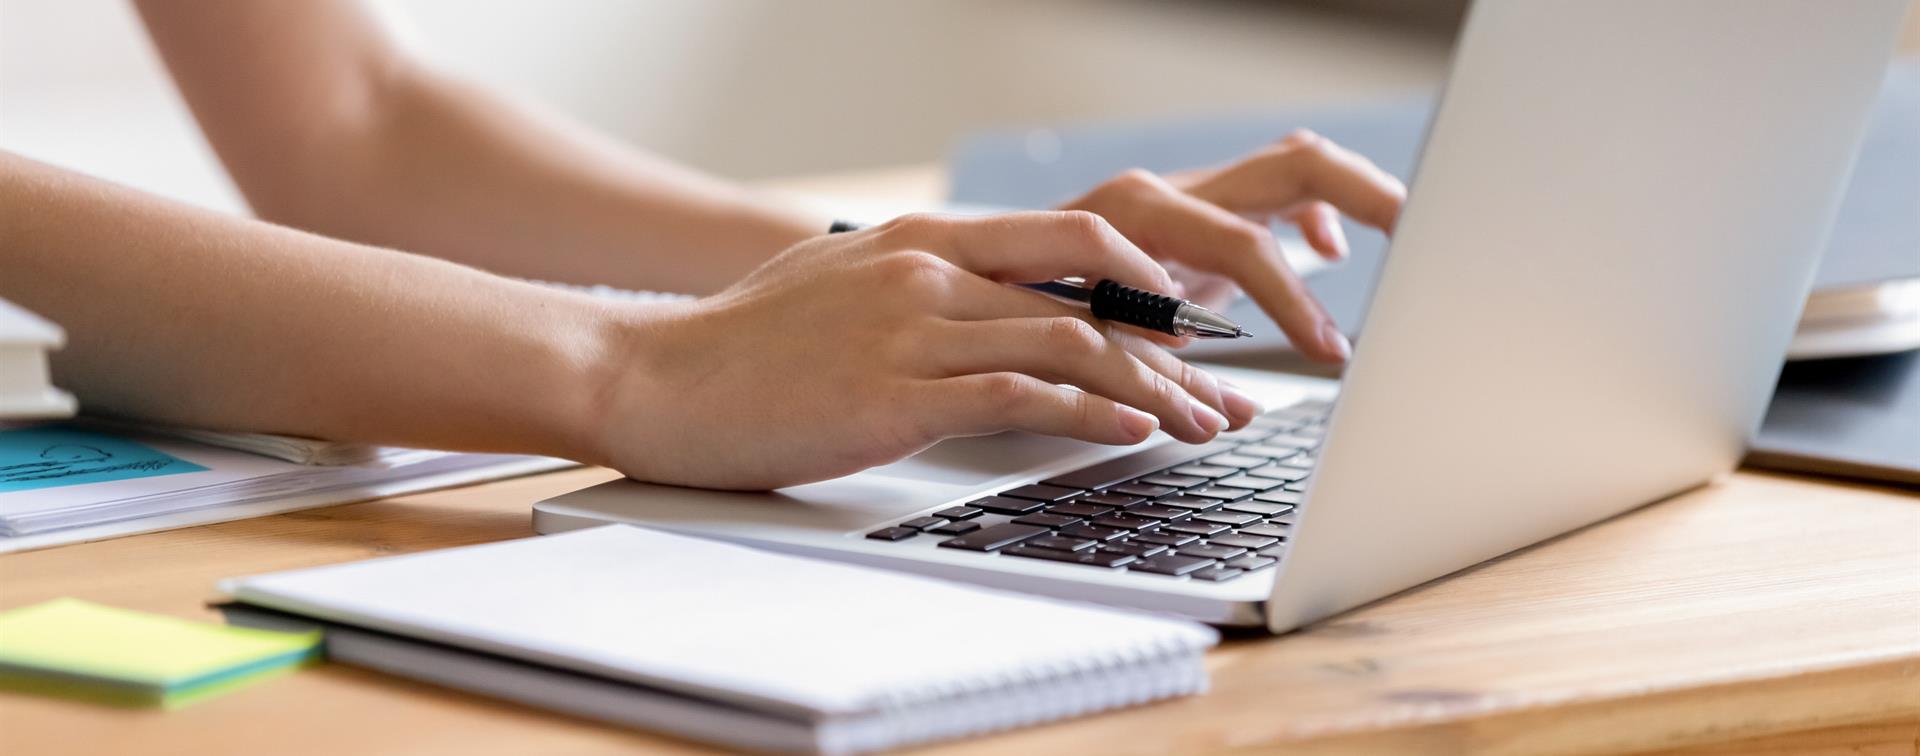 Photo of hands typing on a laptop with open notebook lying in foreground on desk